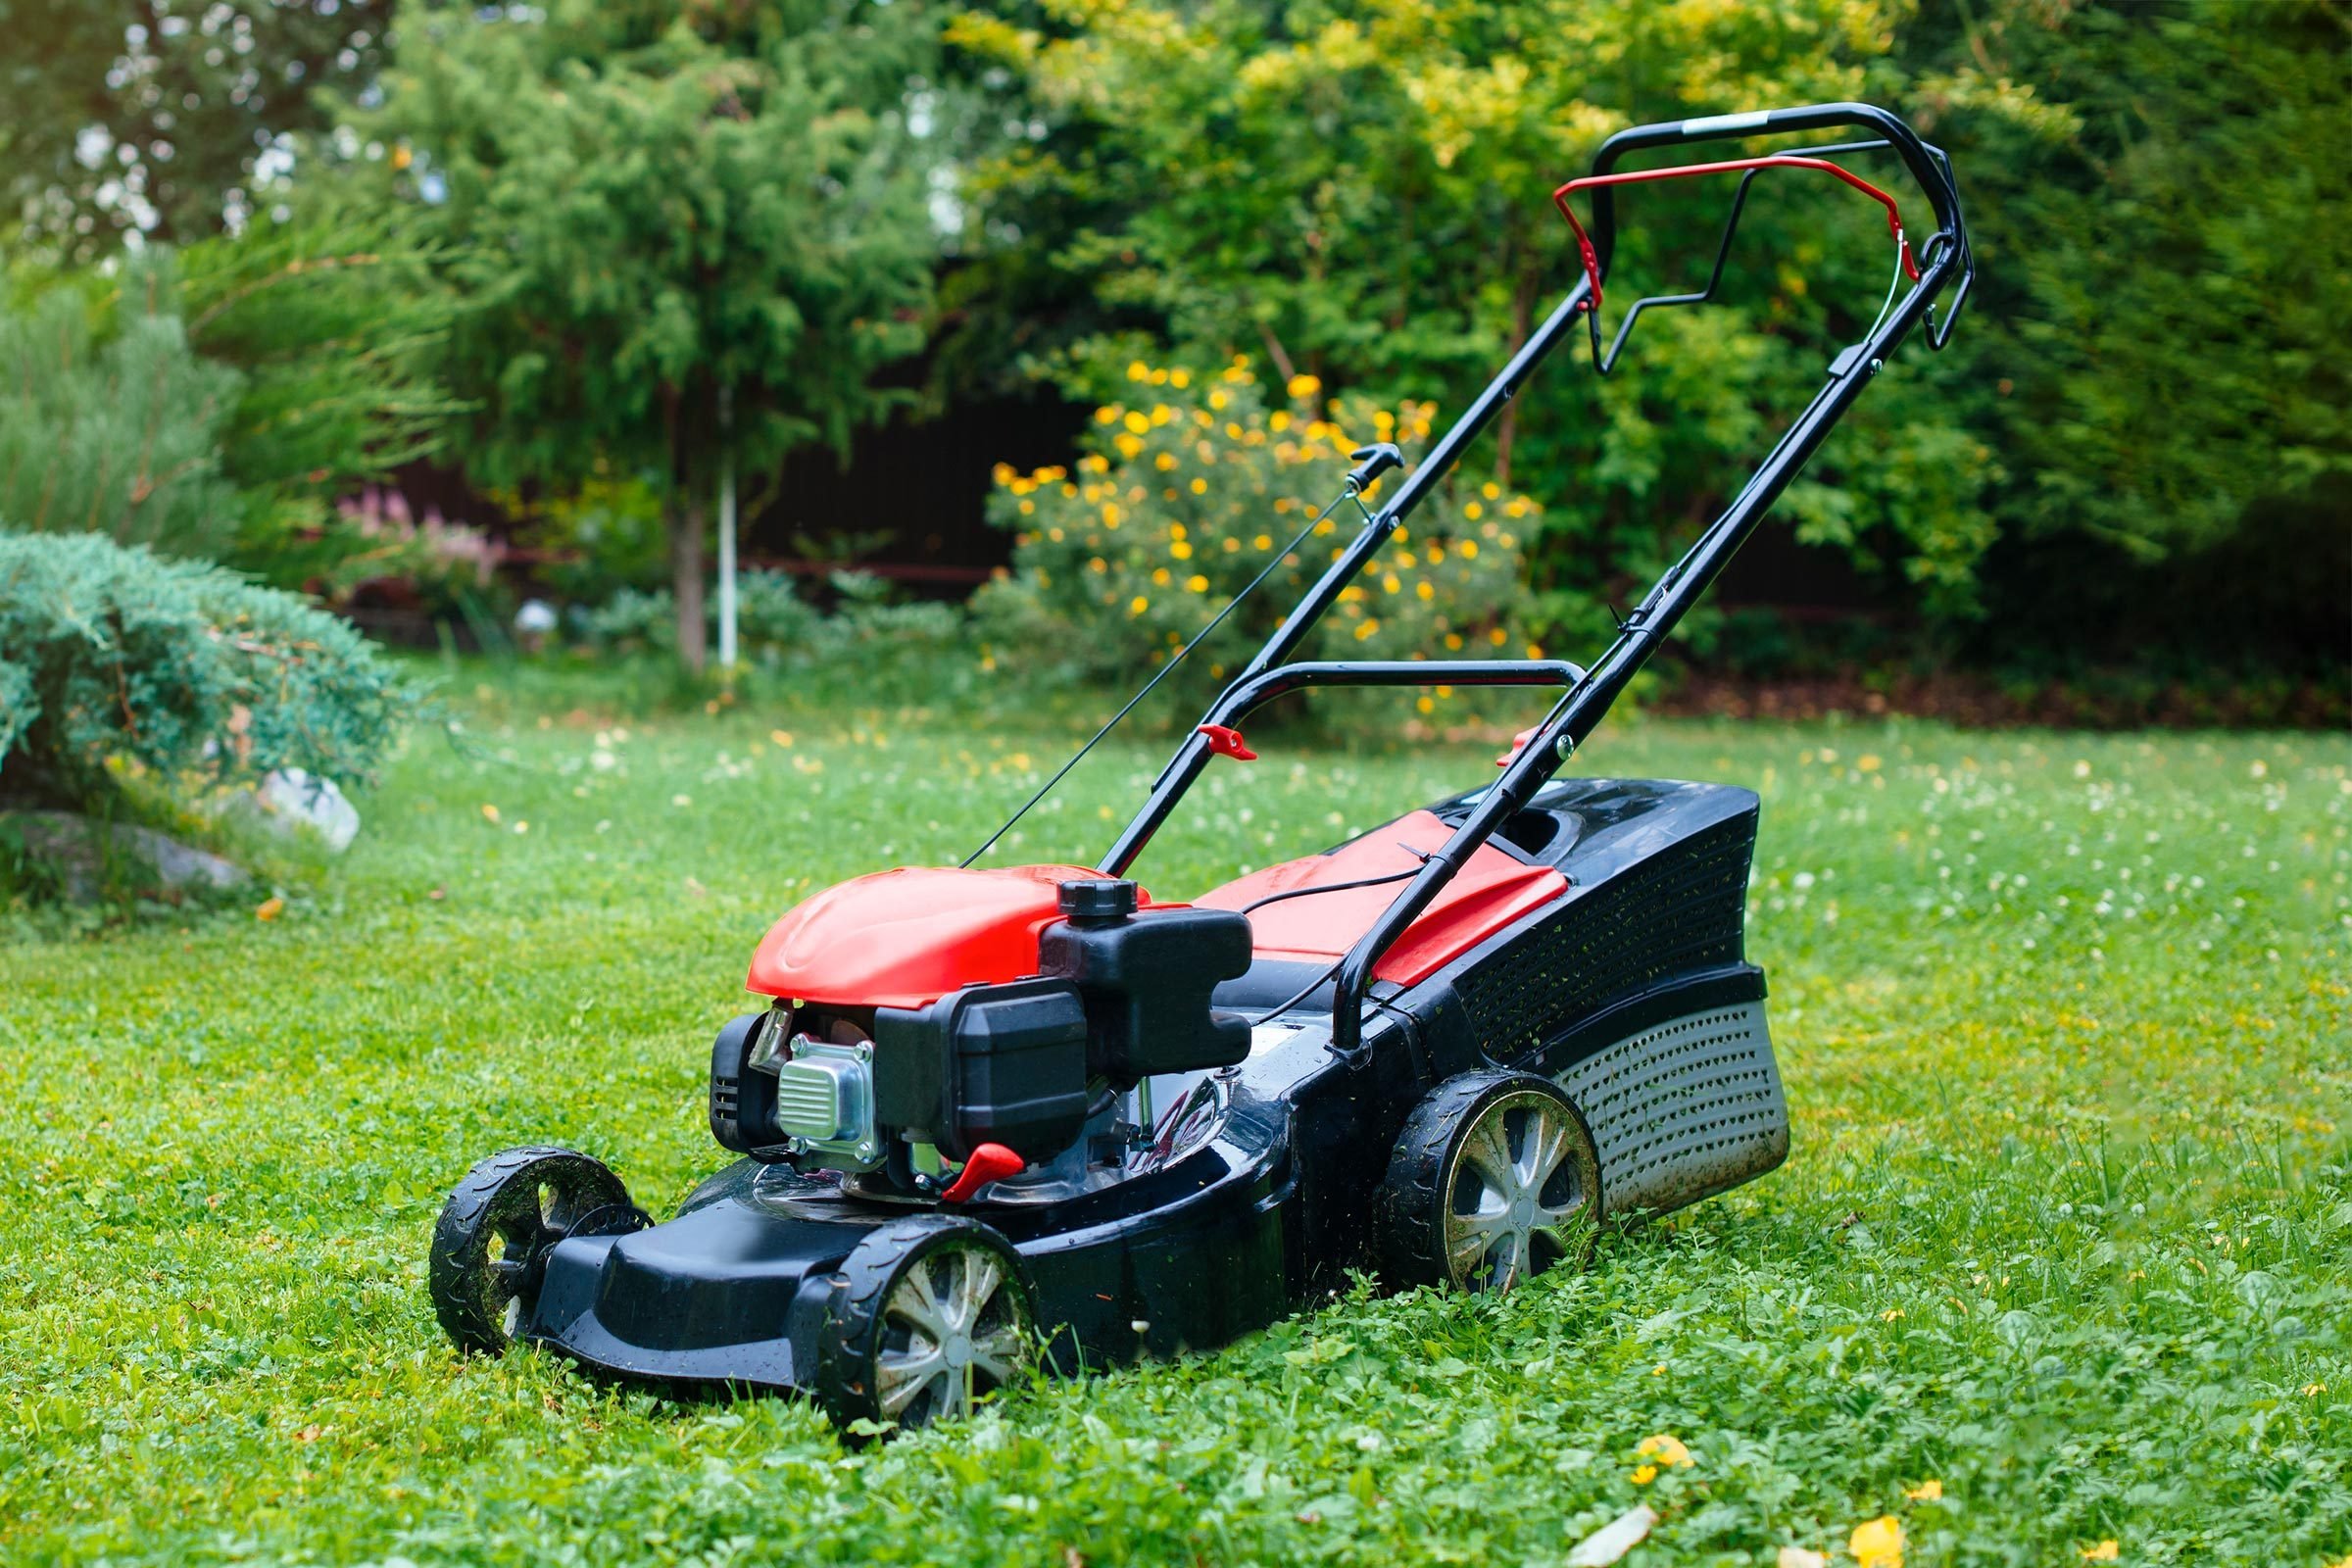 lawnmower - can you use car oil in a lawnmower?